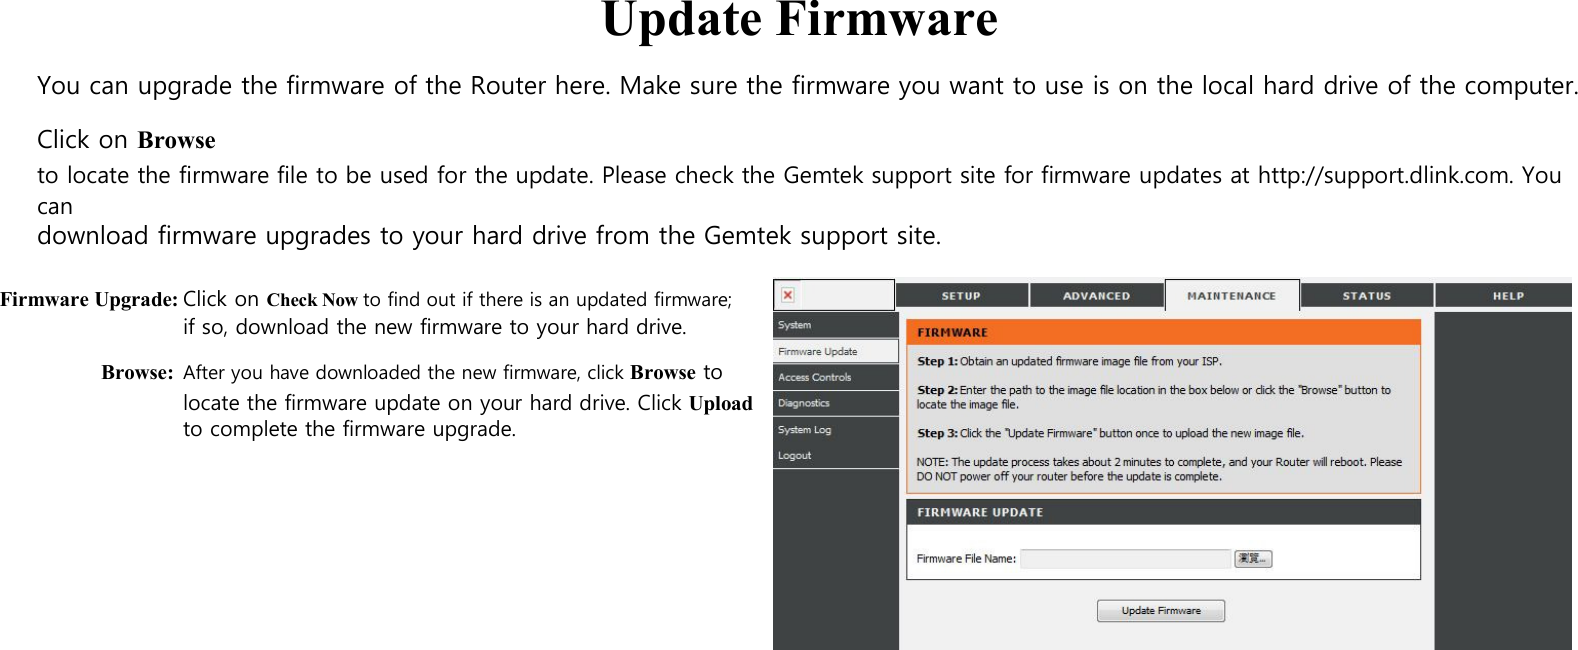  Update Firmware You can upgrade the firmware of the Router here. Make sure the firmware you want to use is on the local hard drive of the computer. Click on Browse to locate the firmware file to be used for the update. Please check the Gemtek support site for firmware updates at http://support.dlink.com. You can download firmware upgrades to your hard drive from the Gemtek support site.  Firmware Upgrade: Click on Check Now to find out if there is an updated firmware; if so, download the new firmware to your hard drive. Browse: After you have downloaded the new firmware, click Browse to locate the firmware update on your hard drive. Click Upload   to complete the firmware upgrade.                                        